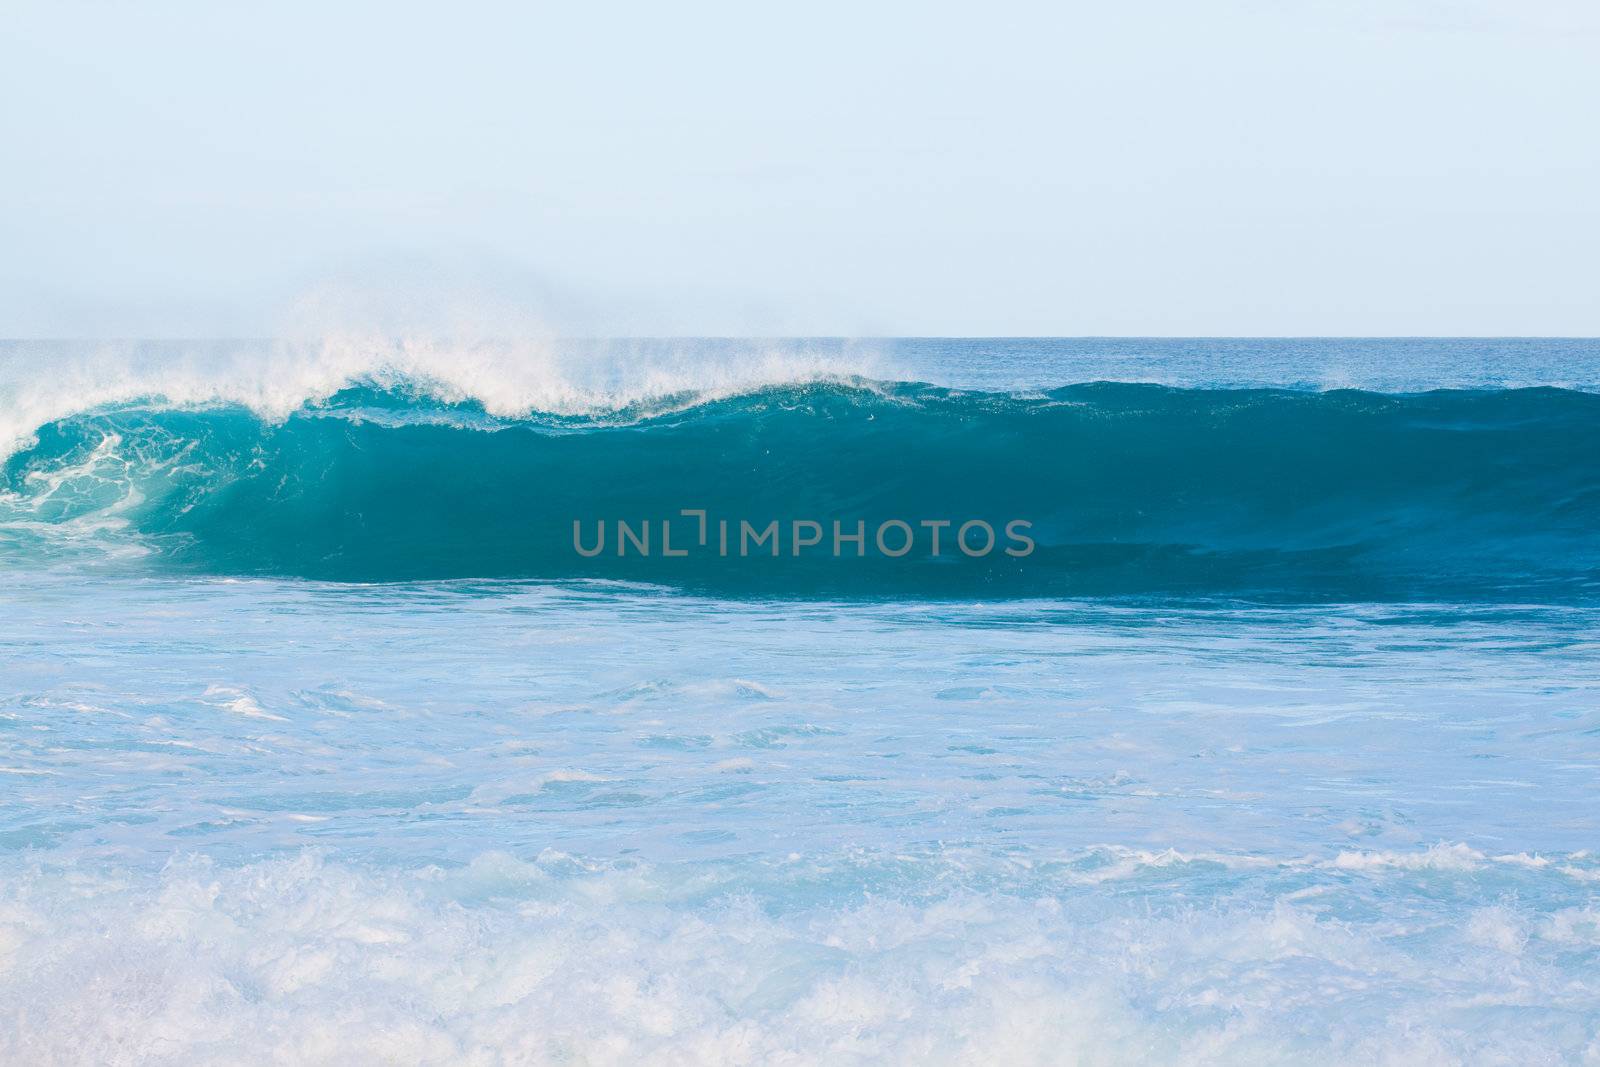 Large waves break off the north shore of oahu hawaii during a great time for surfers surfing.